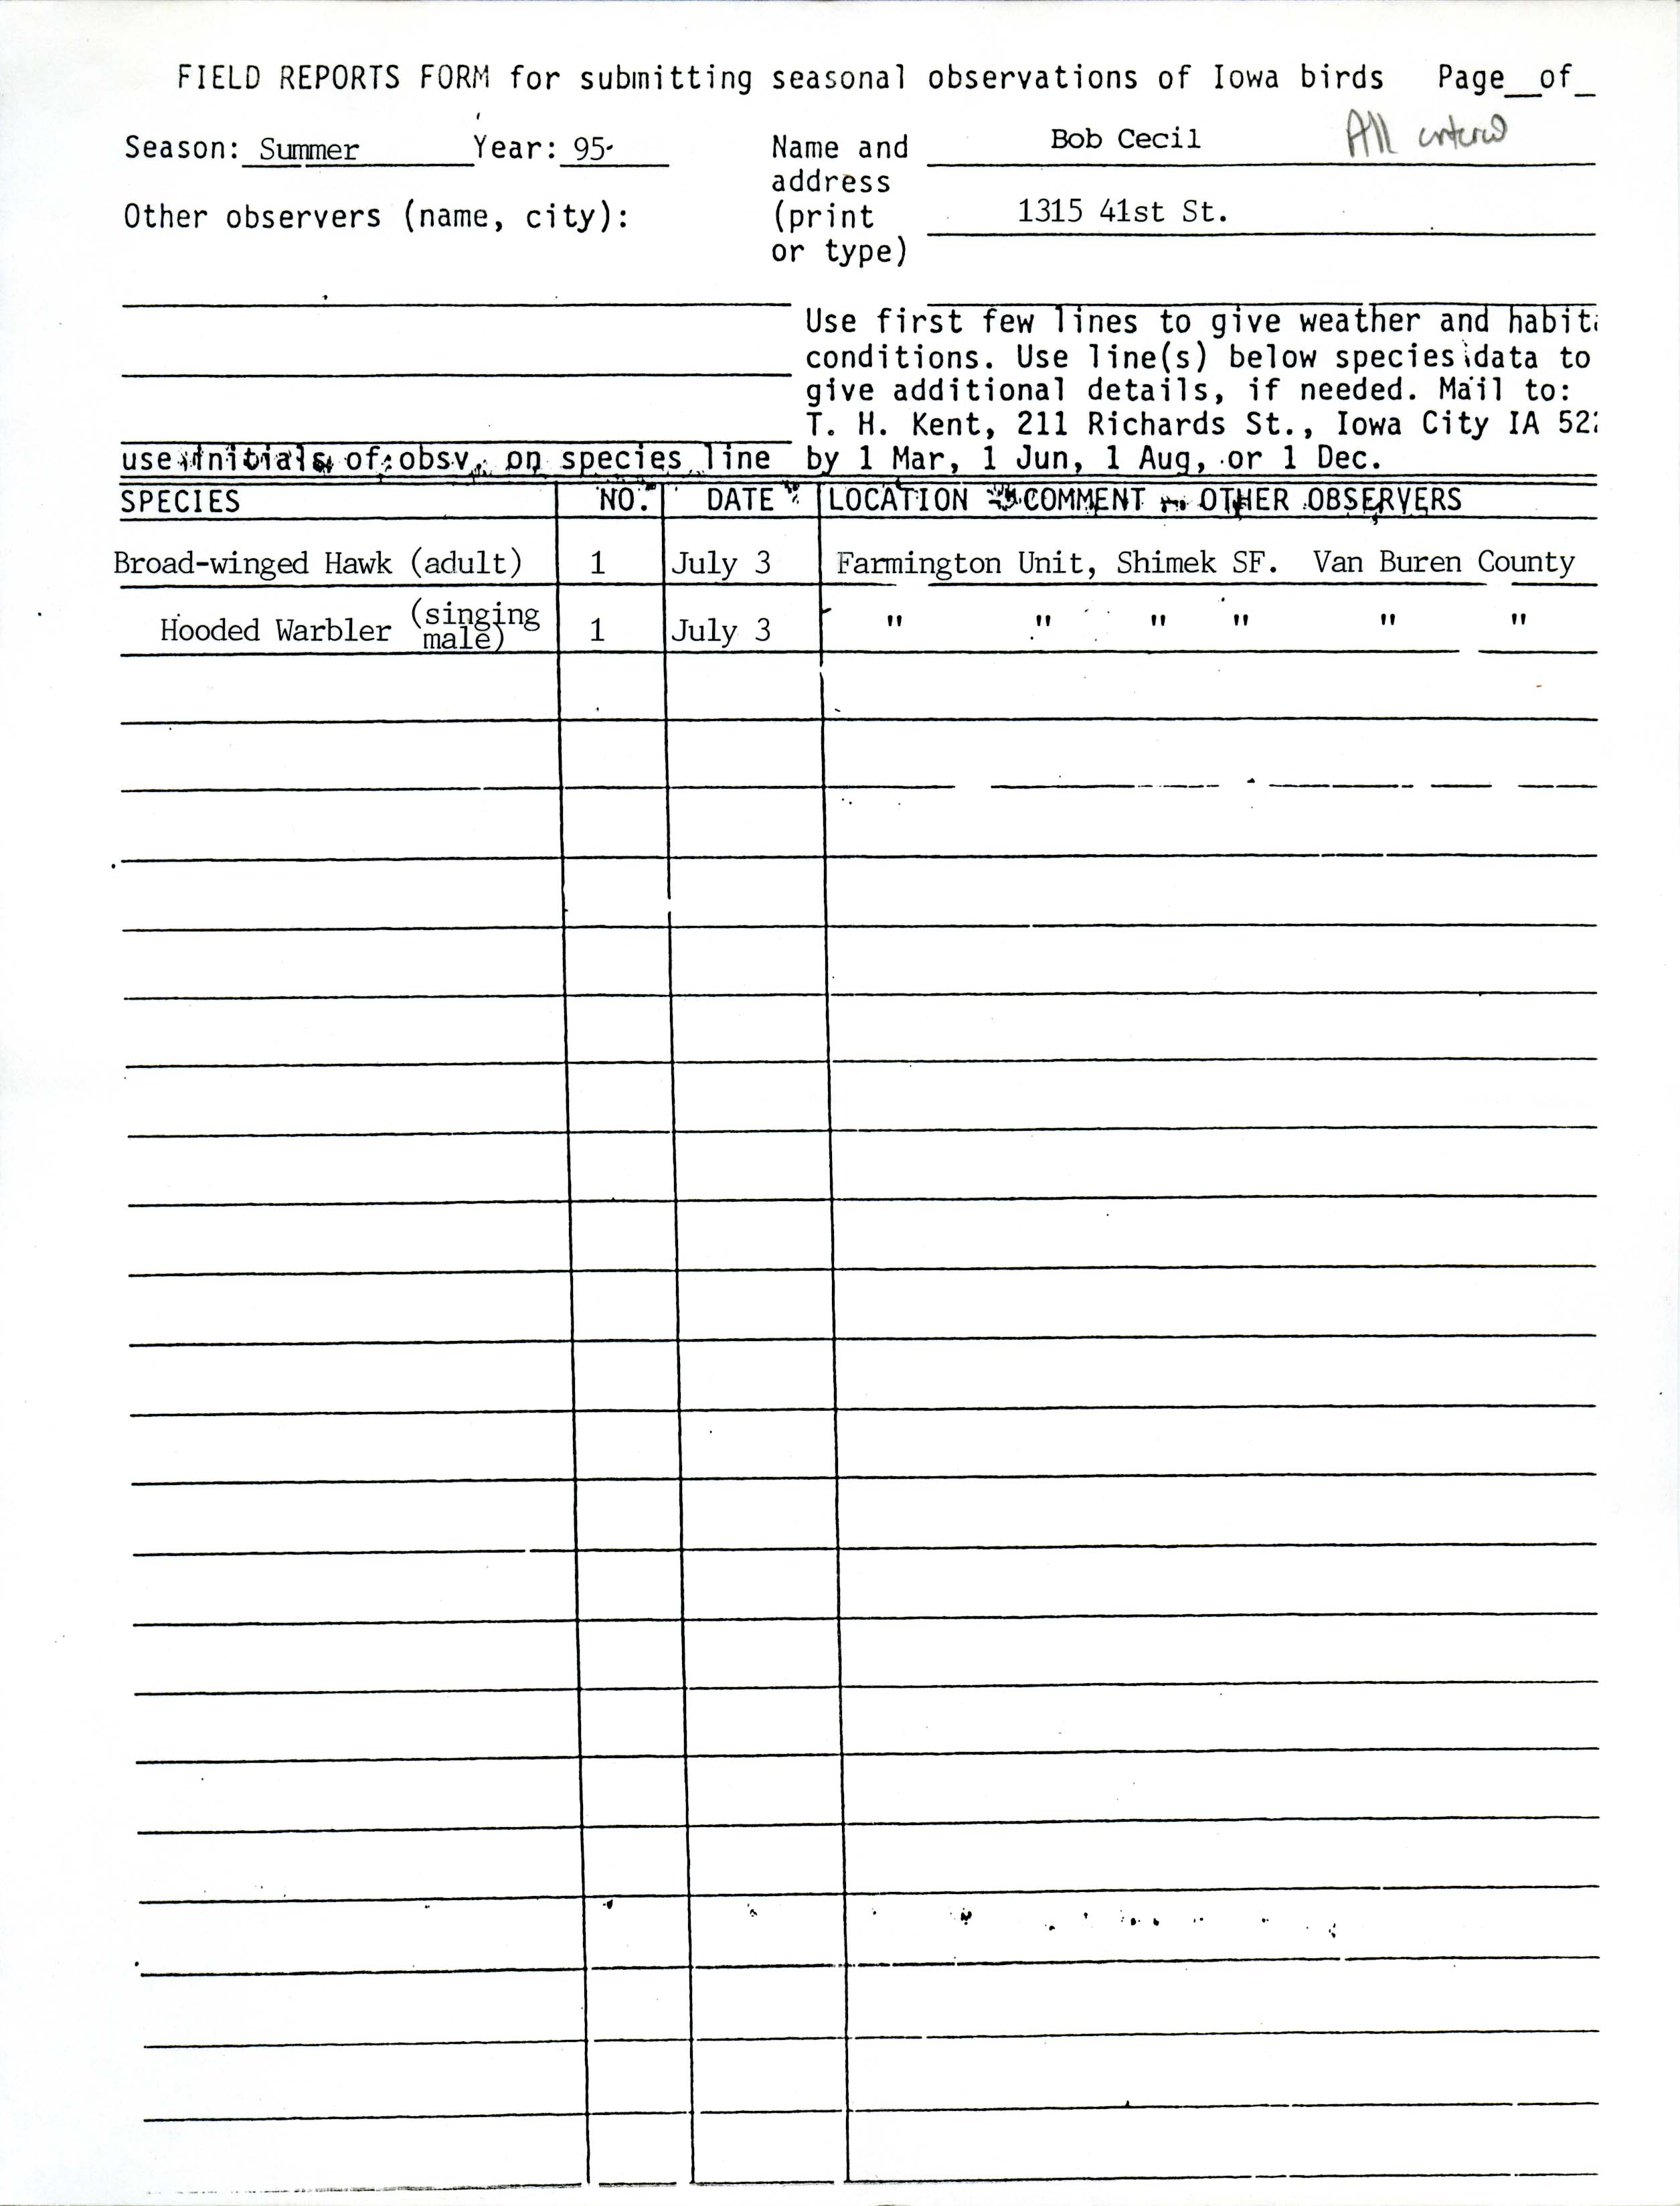 Field reports form for submitting seasonal observations of Iowa birds, summer 1995, Bob Cecil